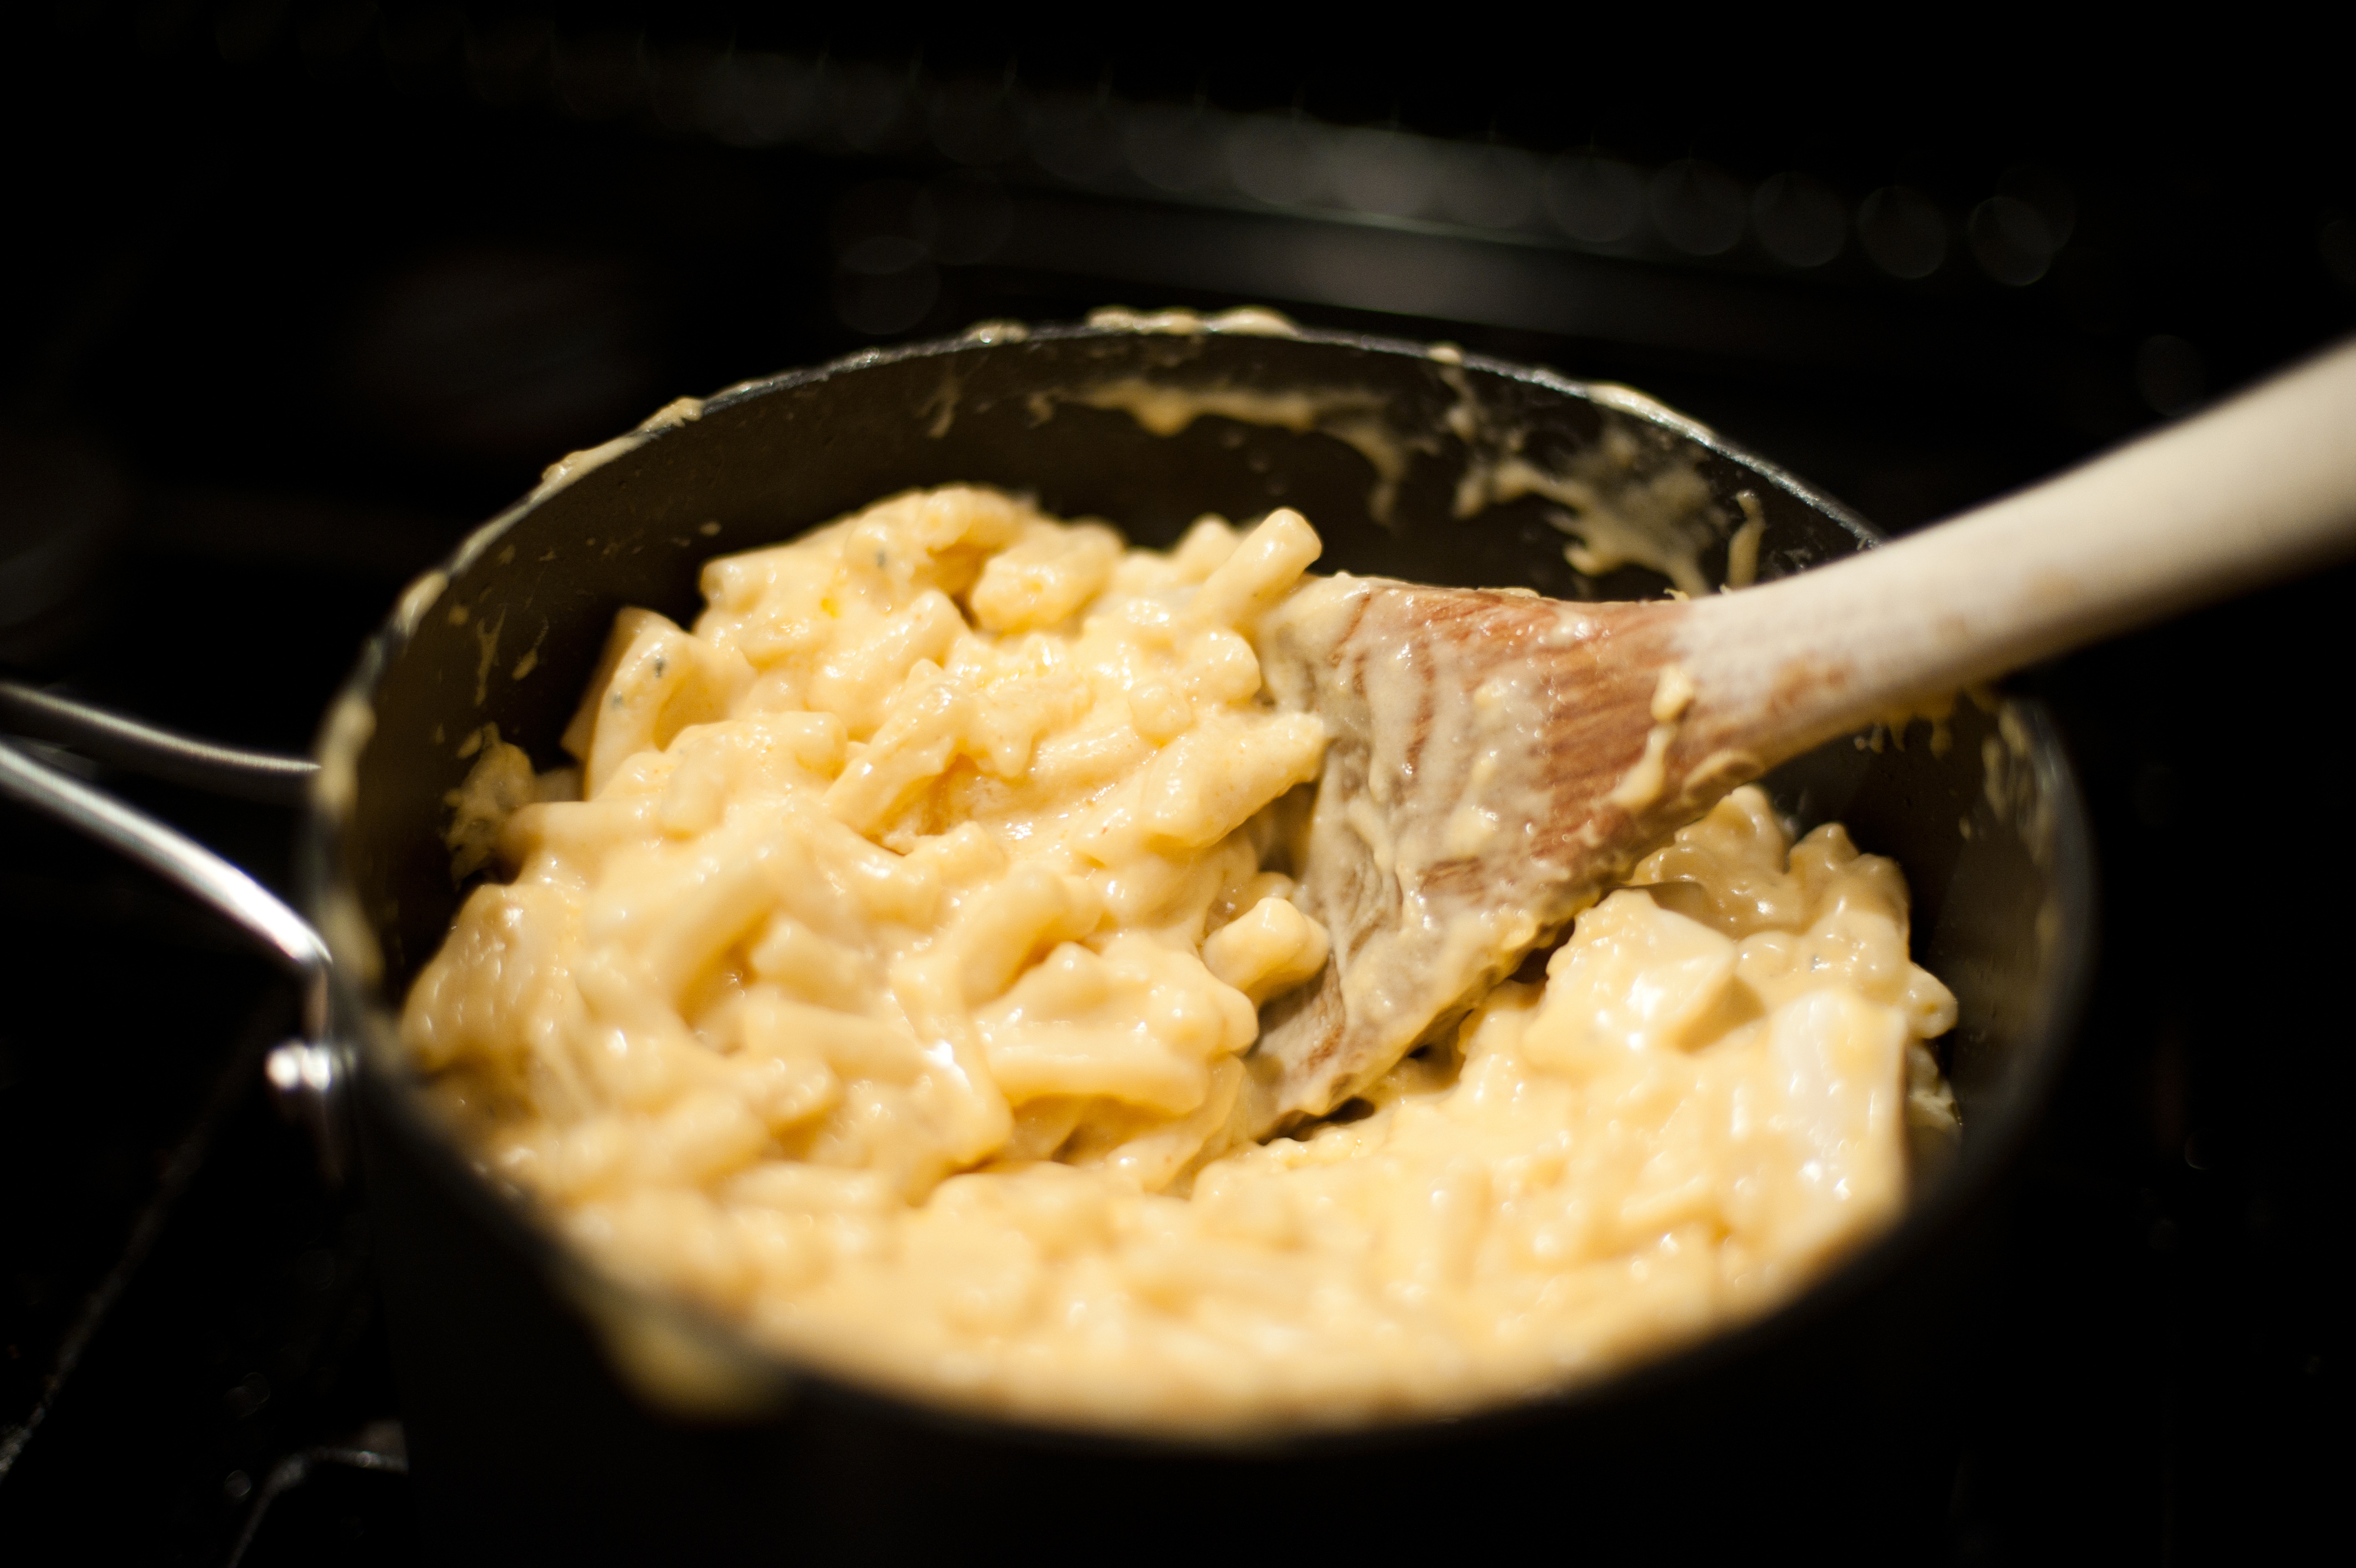 A pot of creamy macaroni and cheese being stirred with a wooden spoon